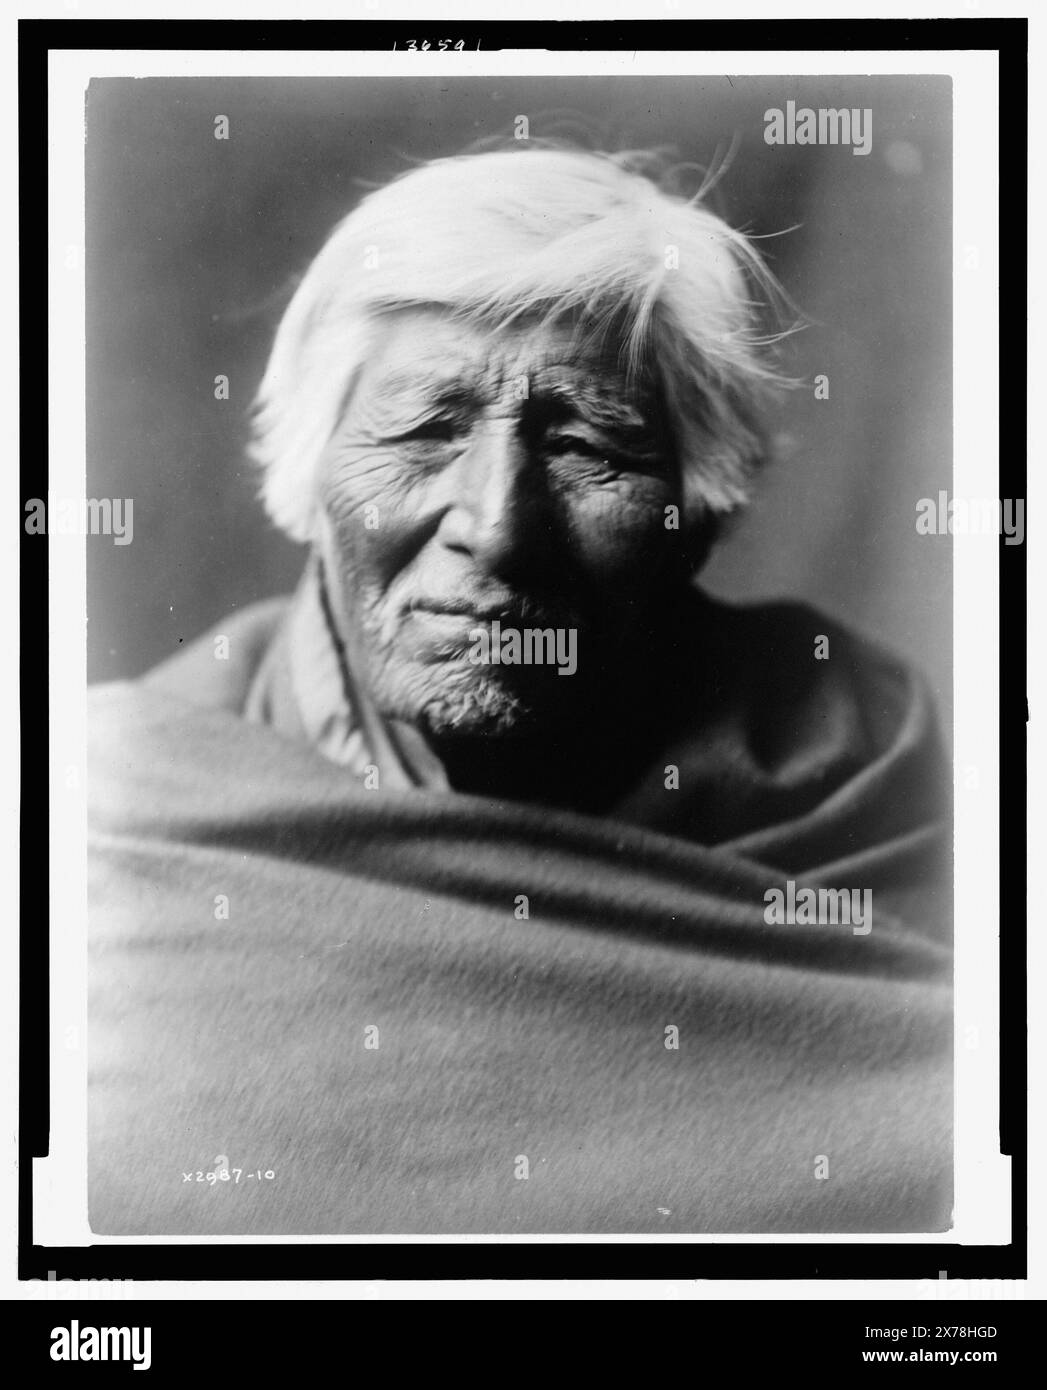 Klickitat type, Title from item., Curtis no. 2987-10., Forms part of: Edward S. Curtis Collection ., Published in: The North American Indian / Edward S. Curtis. [Seattle, Wash.] : Edward S. Curtis, 1907-30, Suppl. v. 7, pl. 225.. Indians of North America, 1910. , Klikitat Indians, 1910. , Aged persons, 1910. Stock Photo